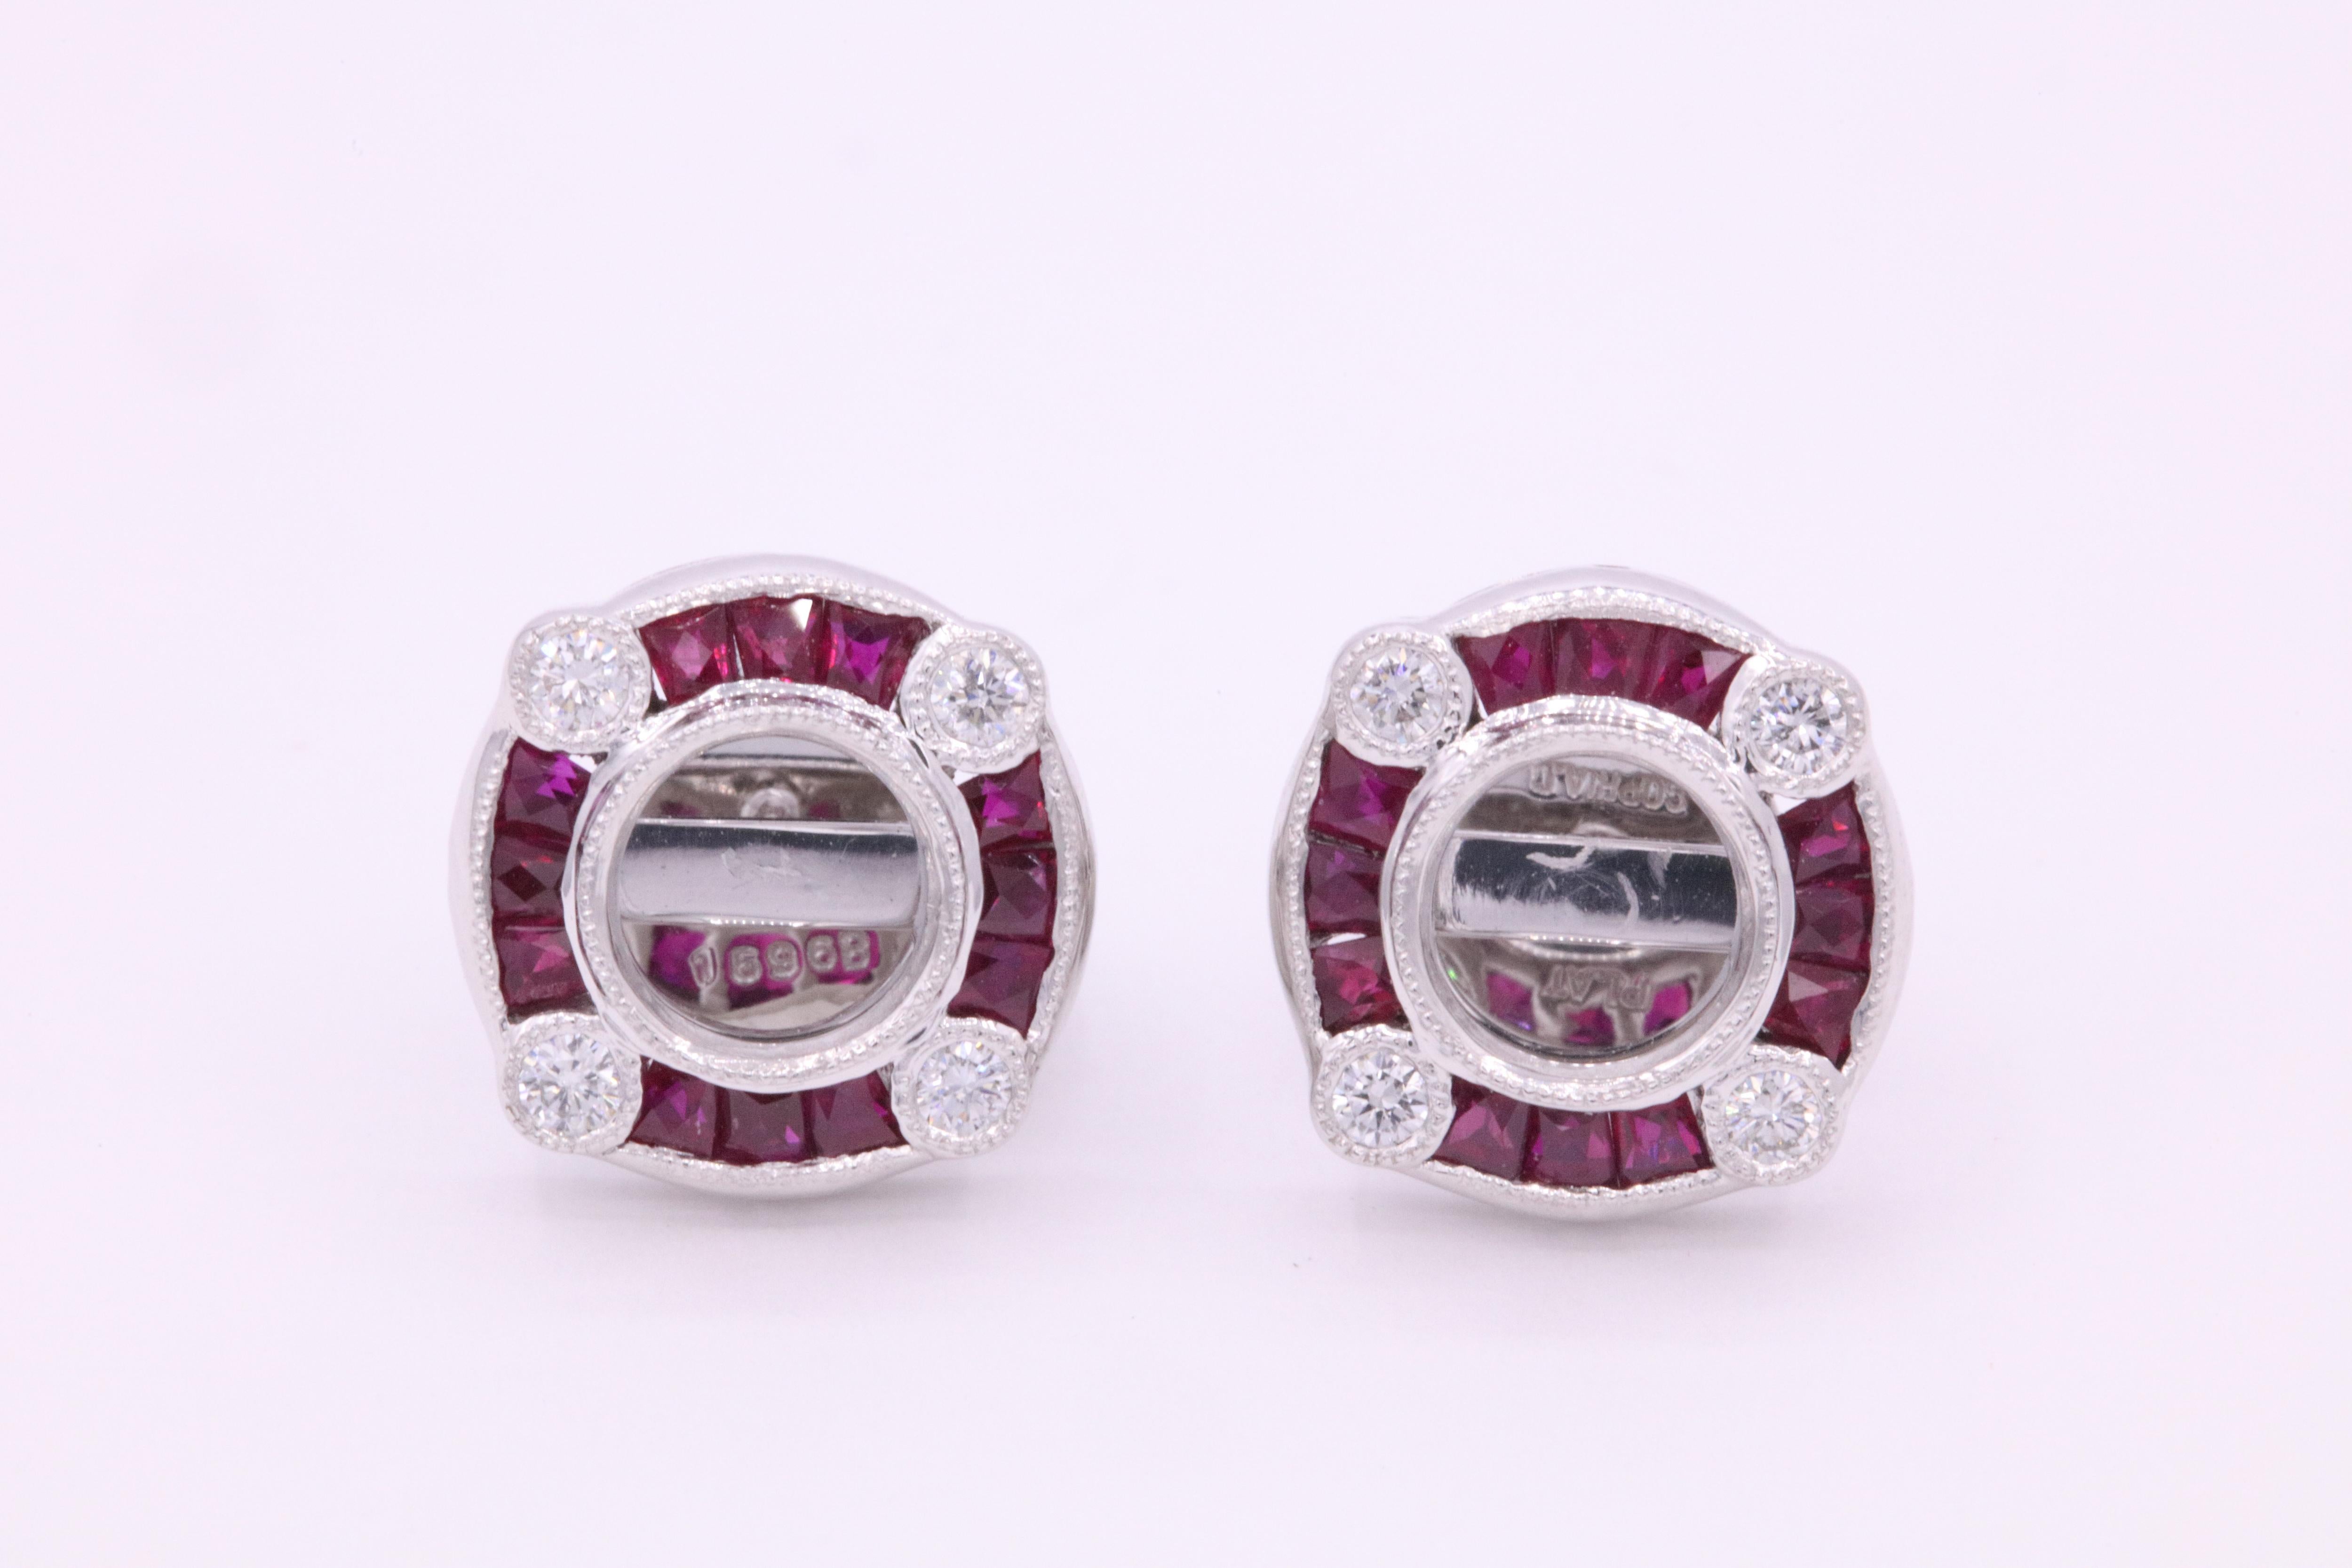 Art Deco inspired earring mountings featuring red rubies weighing 1.44 carats and round brilliants weighing 0.28 carats, crafted in platinum. 

Harbor diamonds can mount your own diamond studs or gemstone.